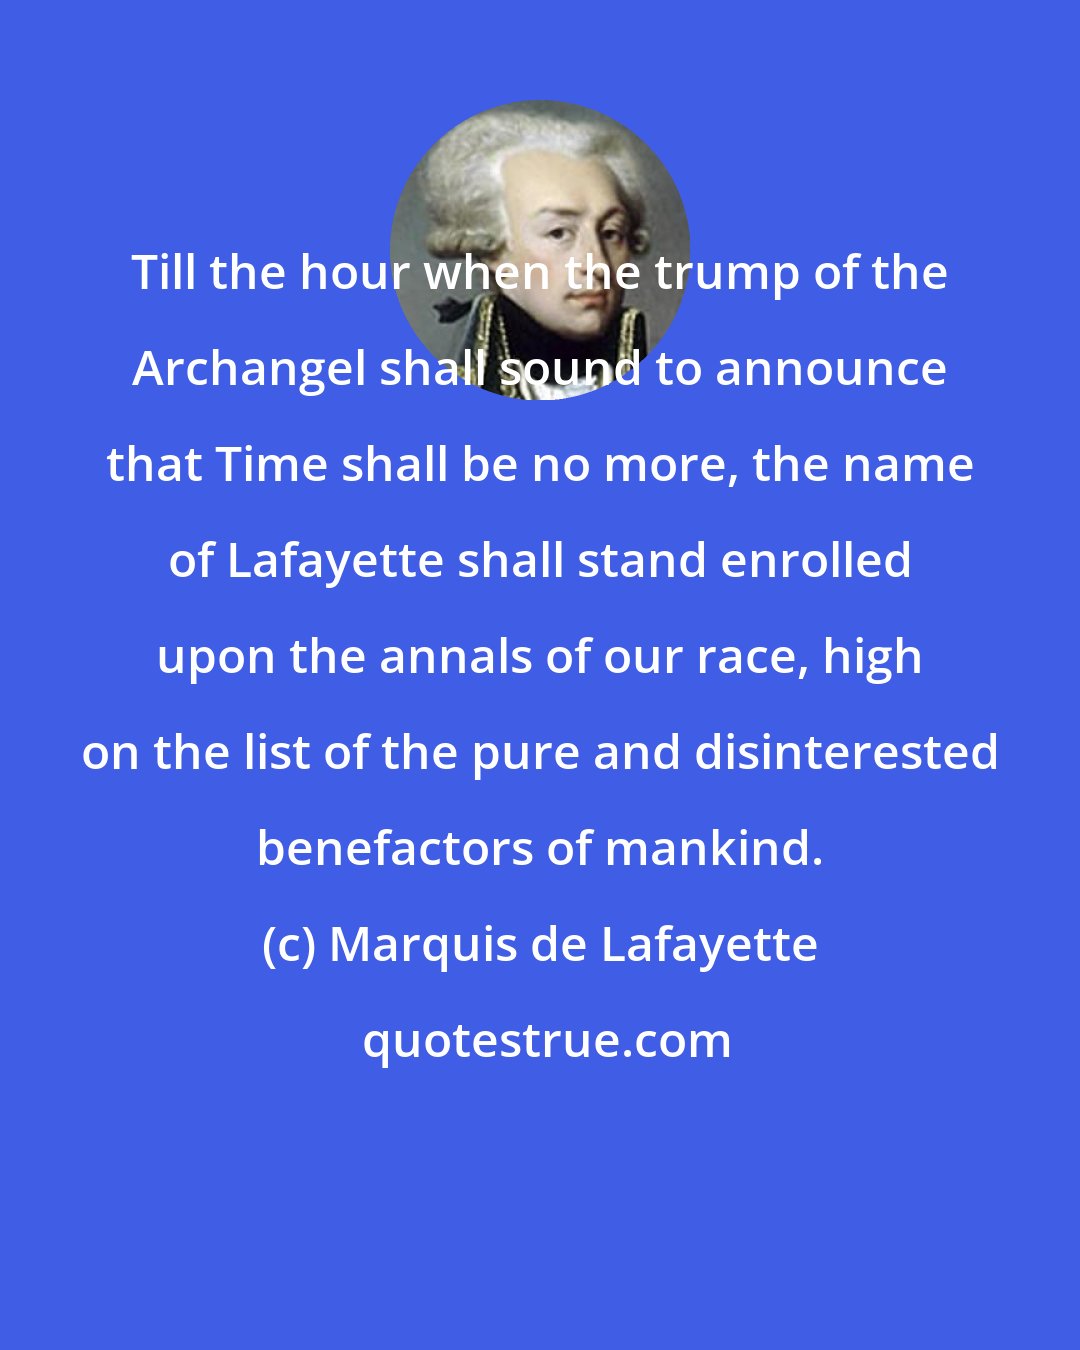 Marquis de Lafayette: Till the hour when the trump of the Archangel shall sound to announce that Time shall be no more, the name of Lafayette shall stand enrolled upon the annals of our race, high on the list of the pure and disinterested benefactors of mankind.